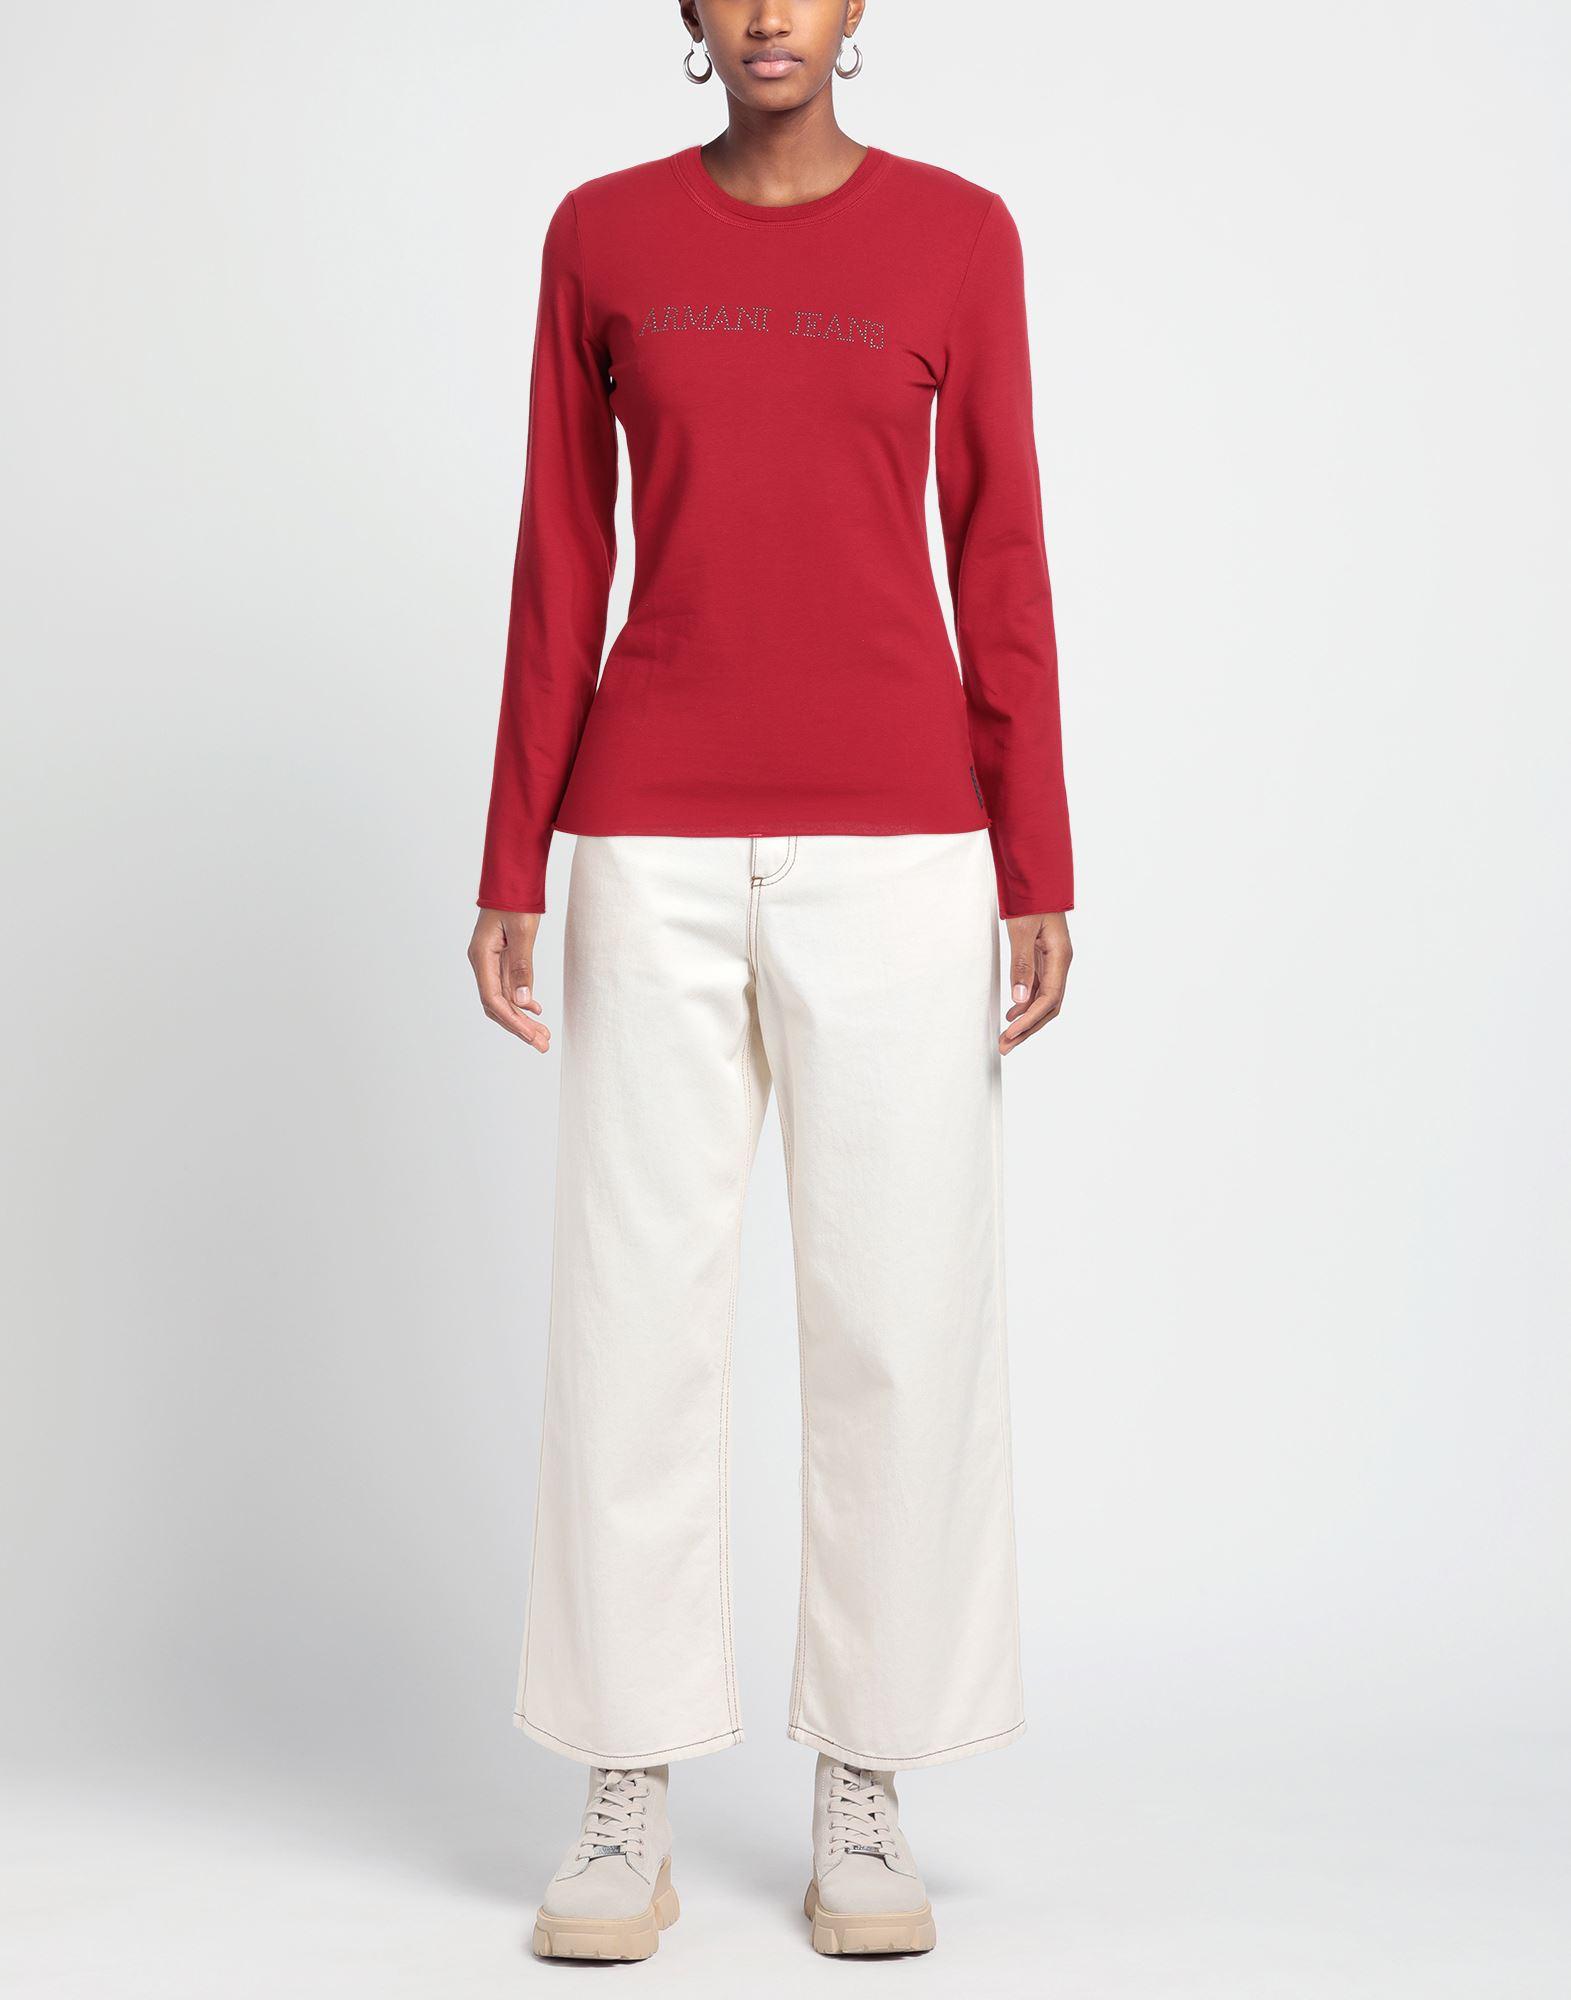 Armani Jeans T-shirt in Red | Lyst